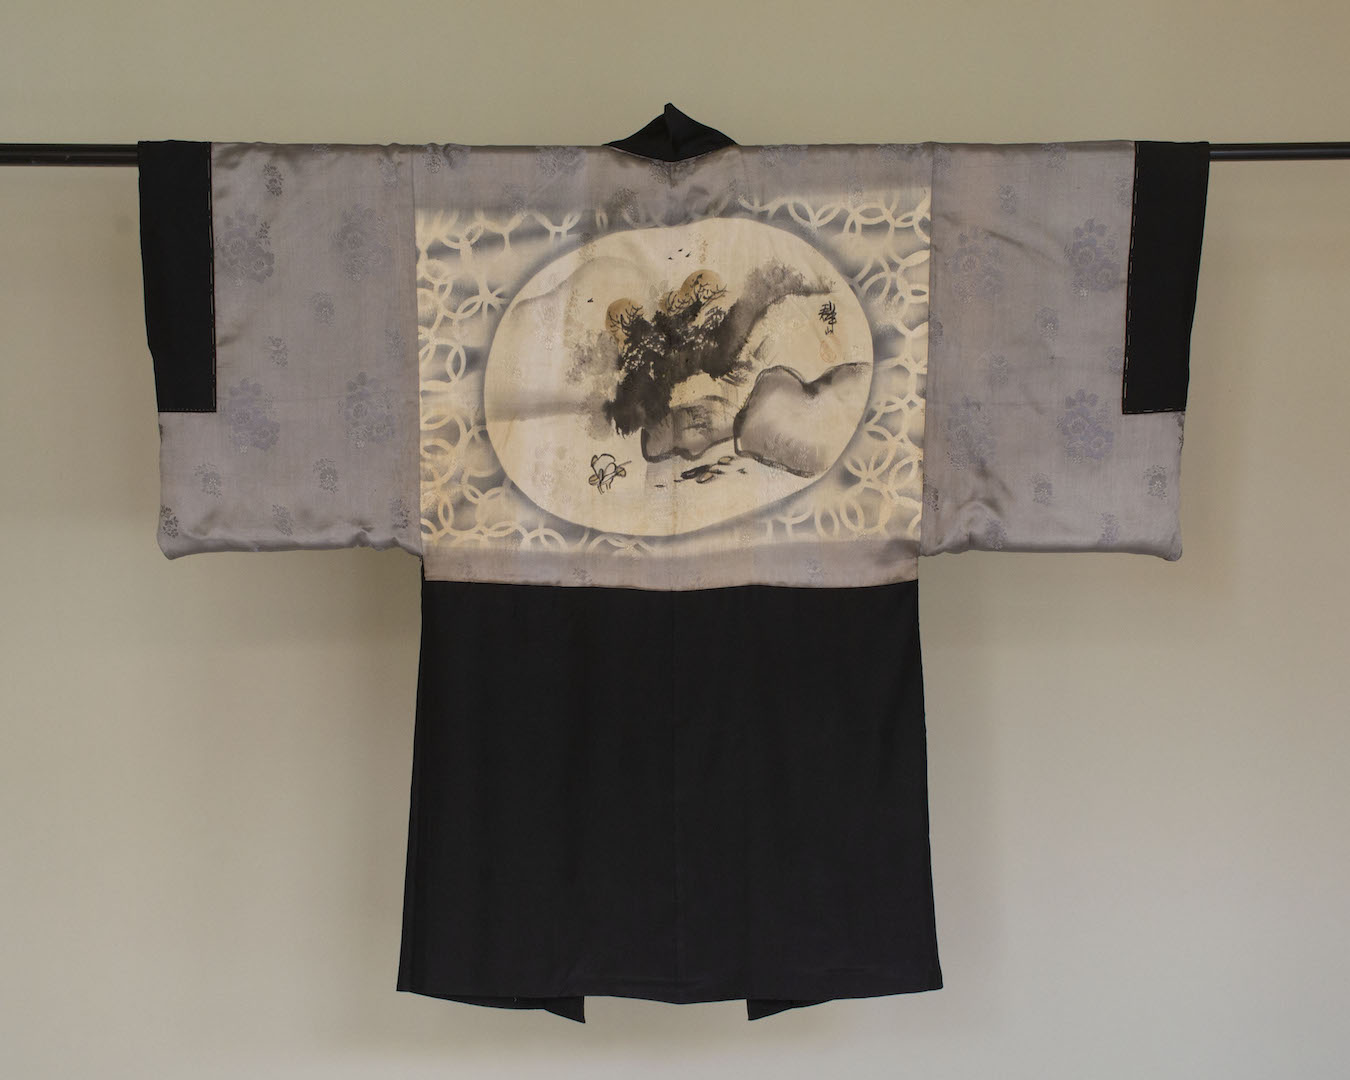 Inside of a man's haori (jacket), turned inside out, showing the decorative lining. Japan, 20th century.